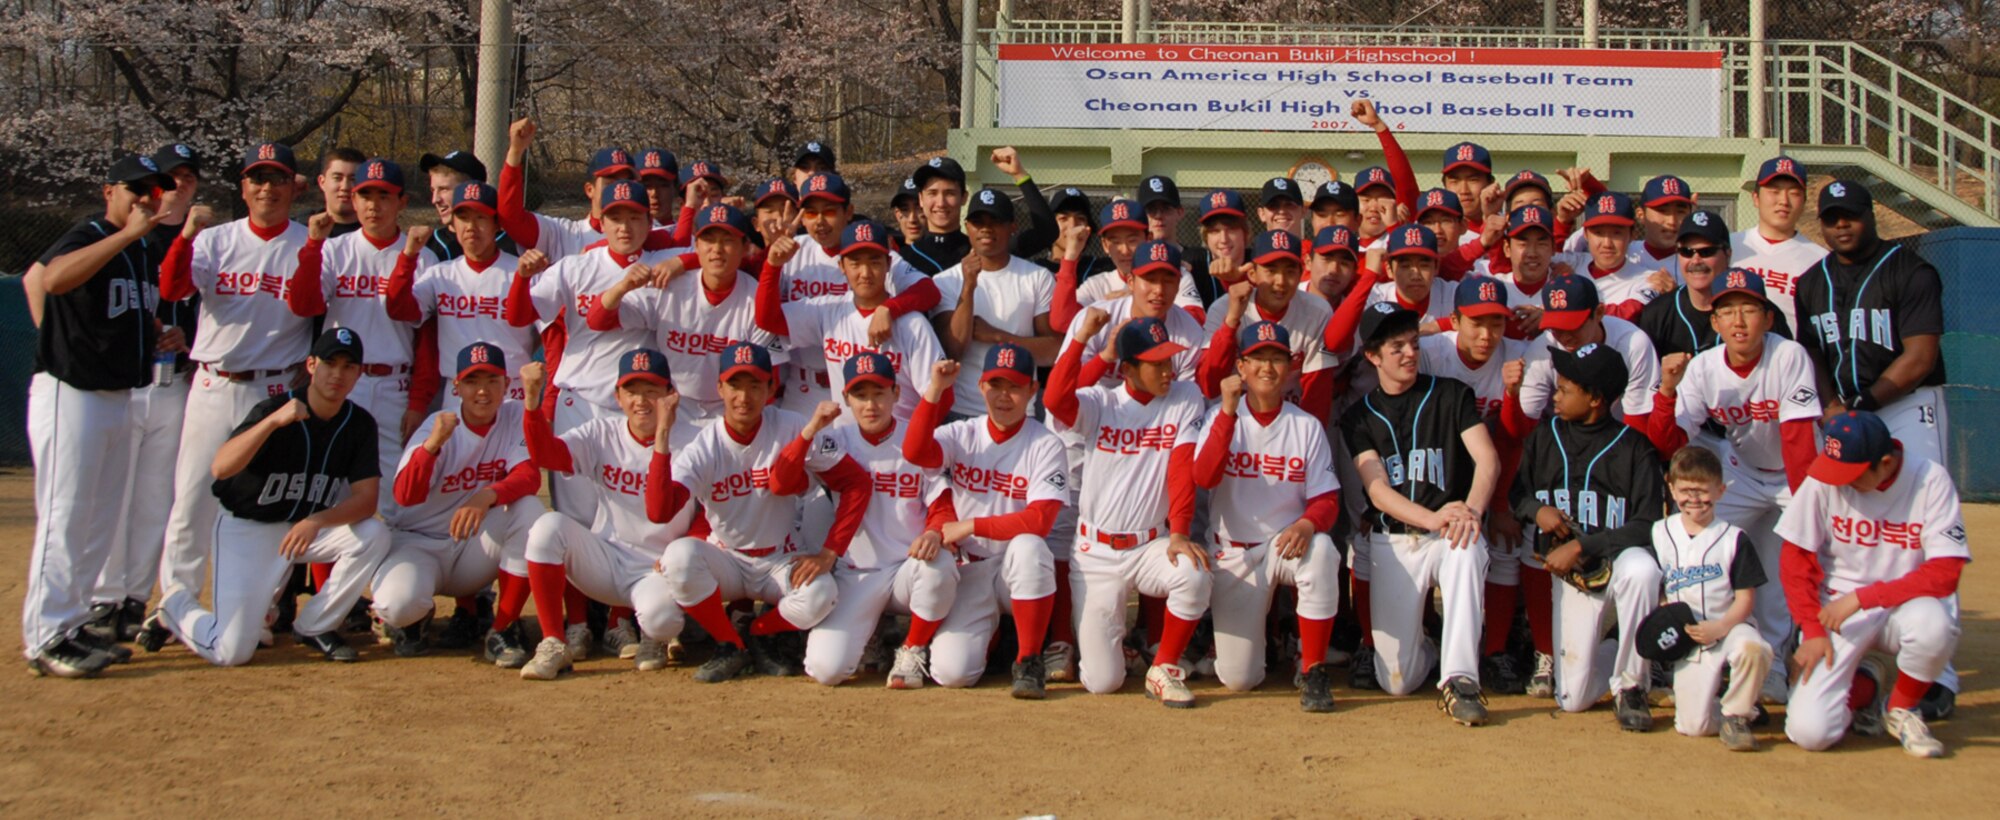 CHEONAN, Republic of Korea --  The Osan American High School Cougars and Cheonan Bukil high school baseball teams pose for a picture after their first match-up April 6. (U.S. Air Force photo by Airman 1st Class Chad Strohmeyer)